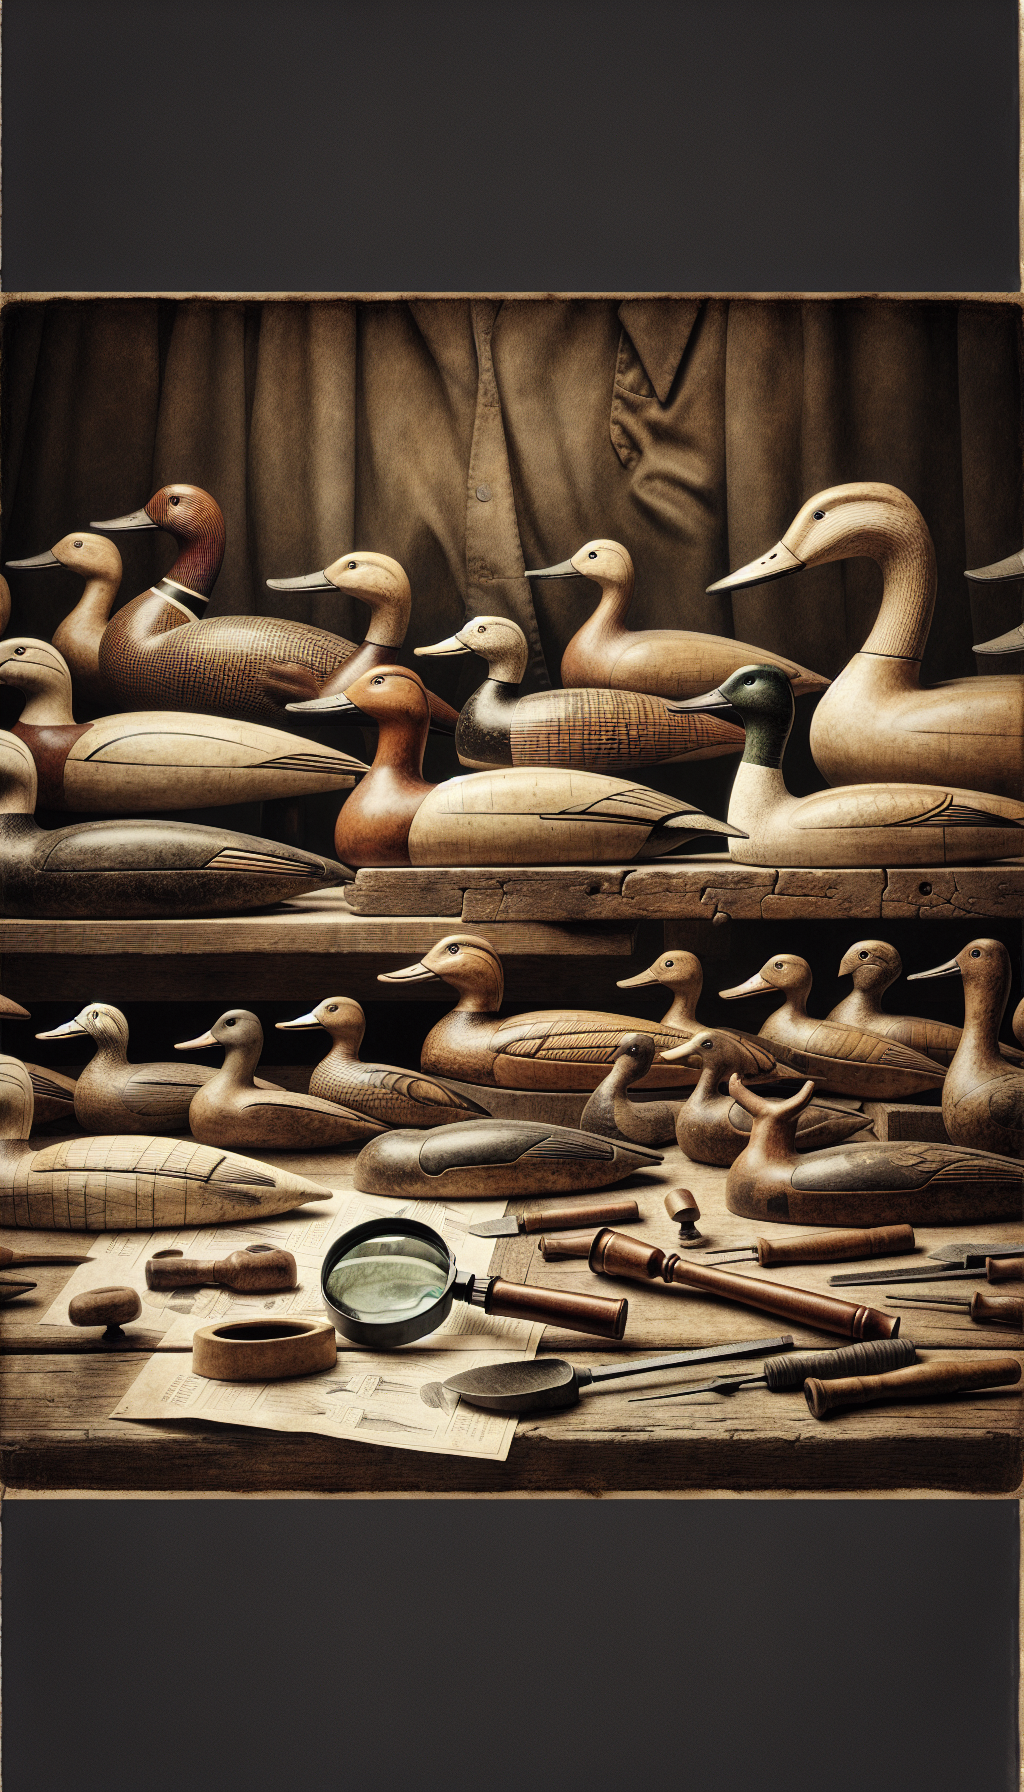 A vivid tableau showcases a selective array of antique duck decoys lined up on a vintage workbench. Each decoy, subtly branded with the iconic signature of its craftsman, is set against a magnifying glass hovering above, revealing telltale carving marks and patinas. This montage, executed in varying artistic styles from realism to impressionism, encapsulates the essence of historic decoy artistry and identification.